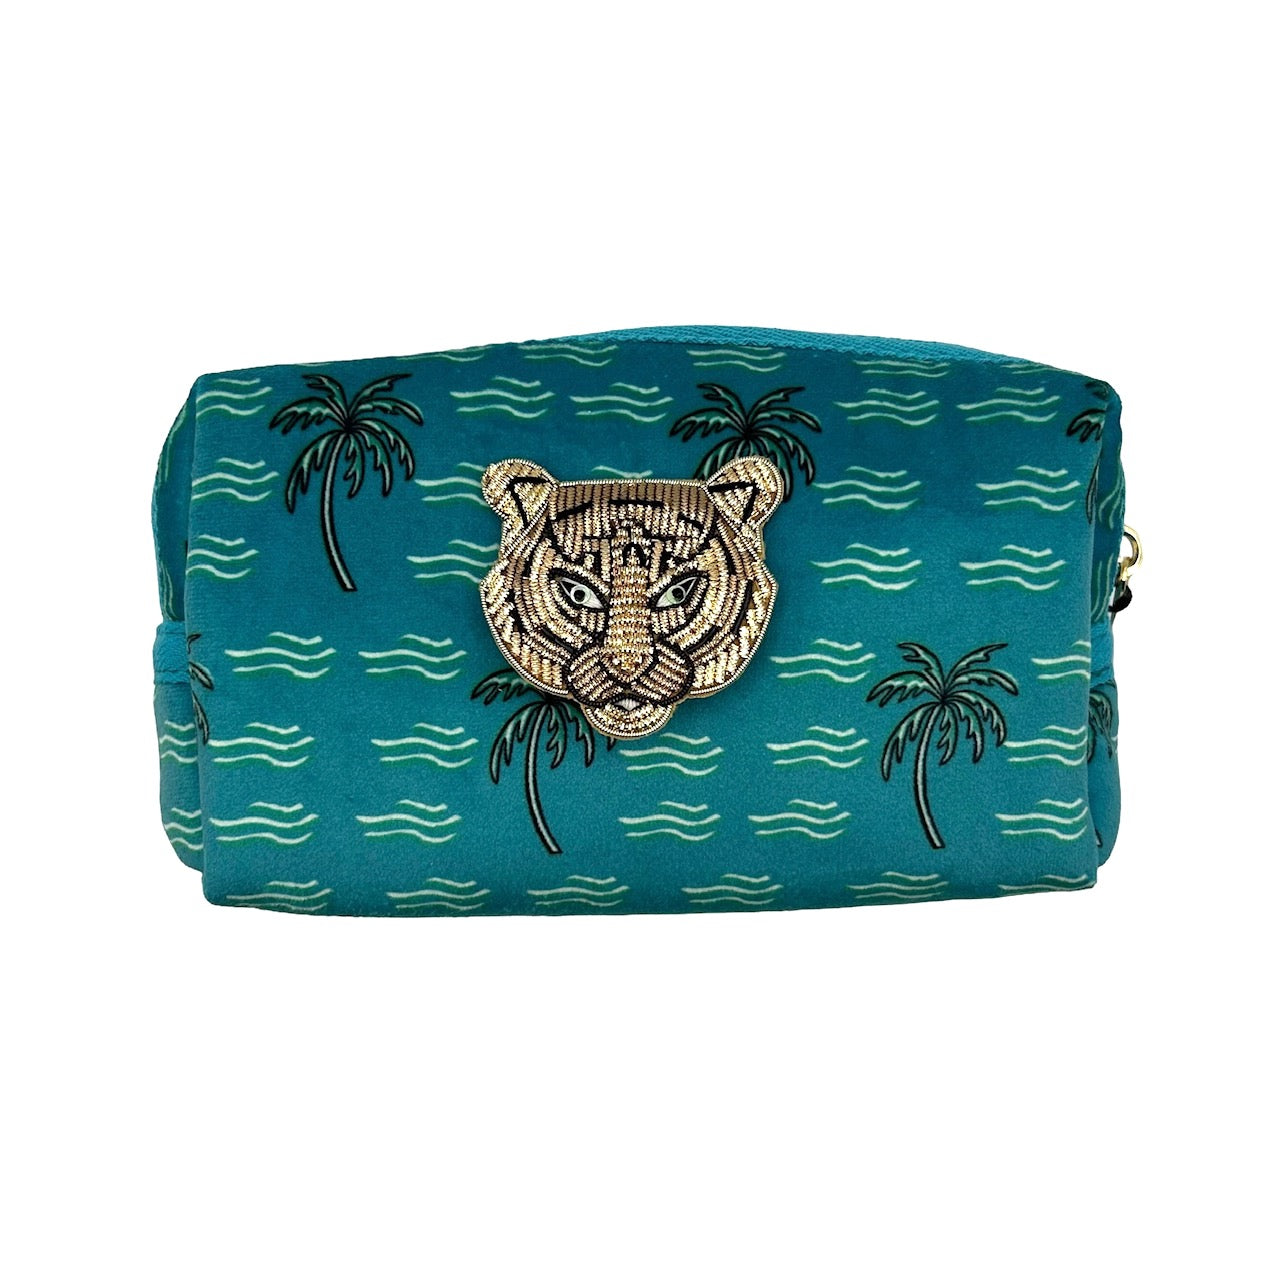 Teal palm large make-up bag & tiger brooch - recycled velvet, large and small